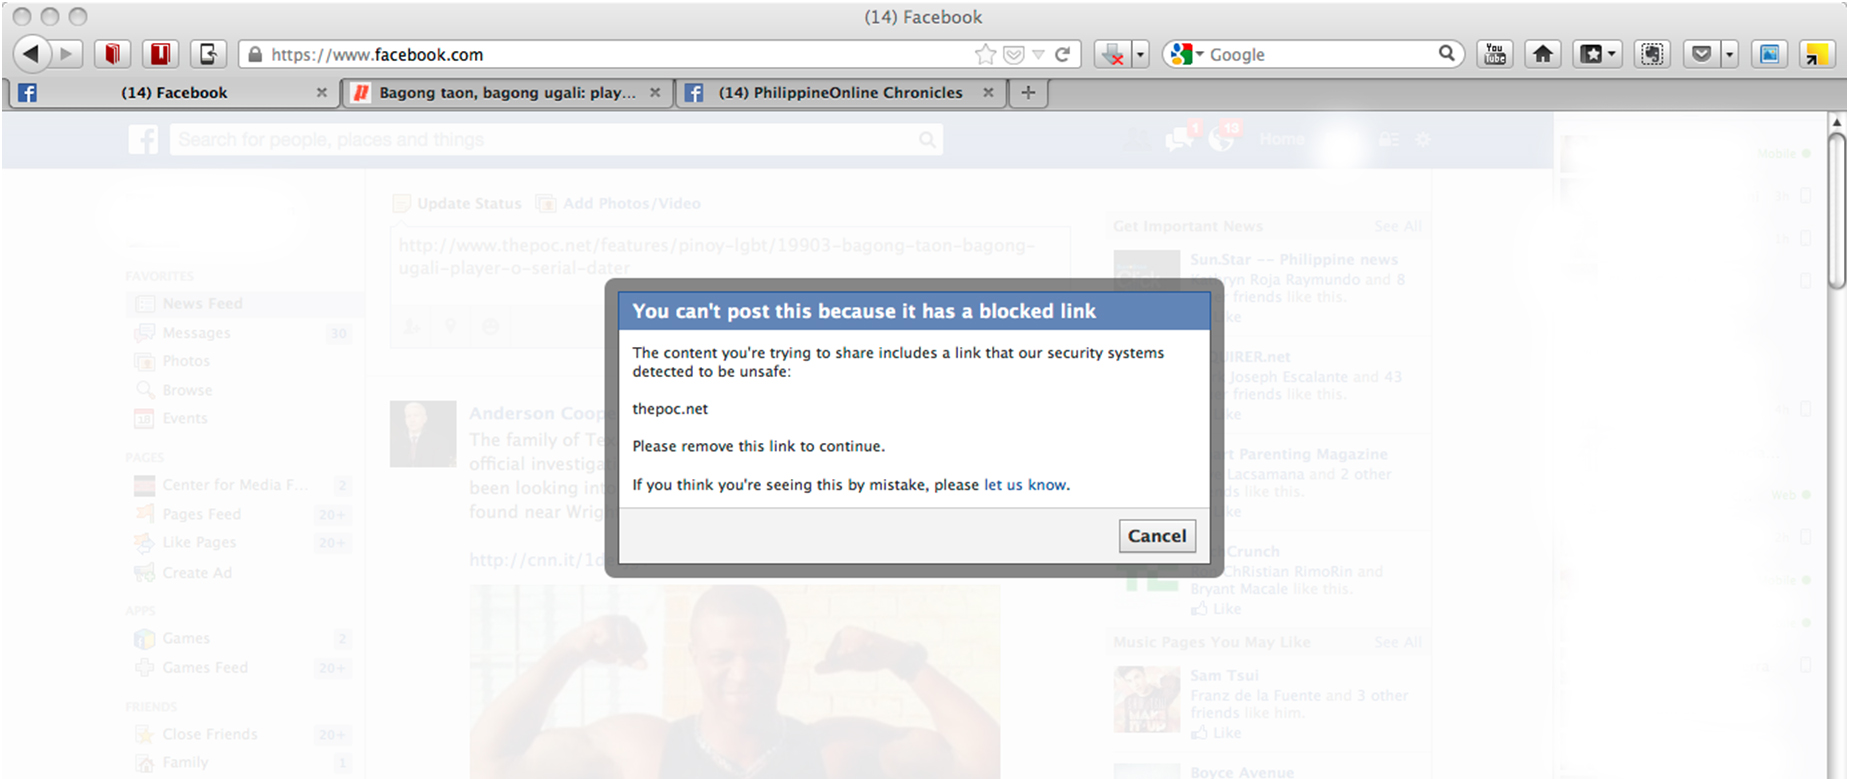 Facebook blocking links from thepoc.net – 18 January 2014, 12:45 a.m.